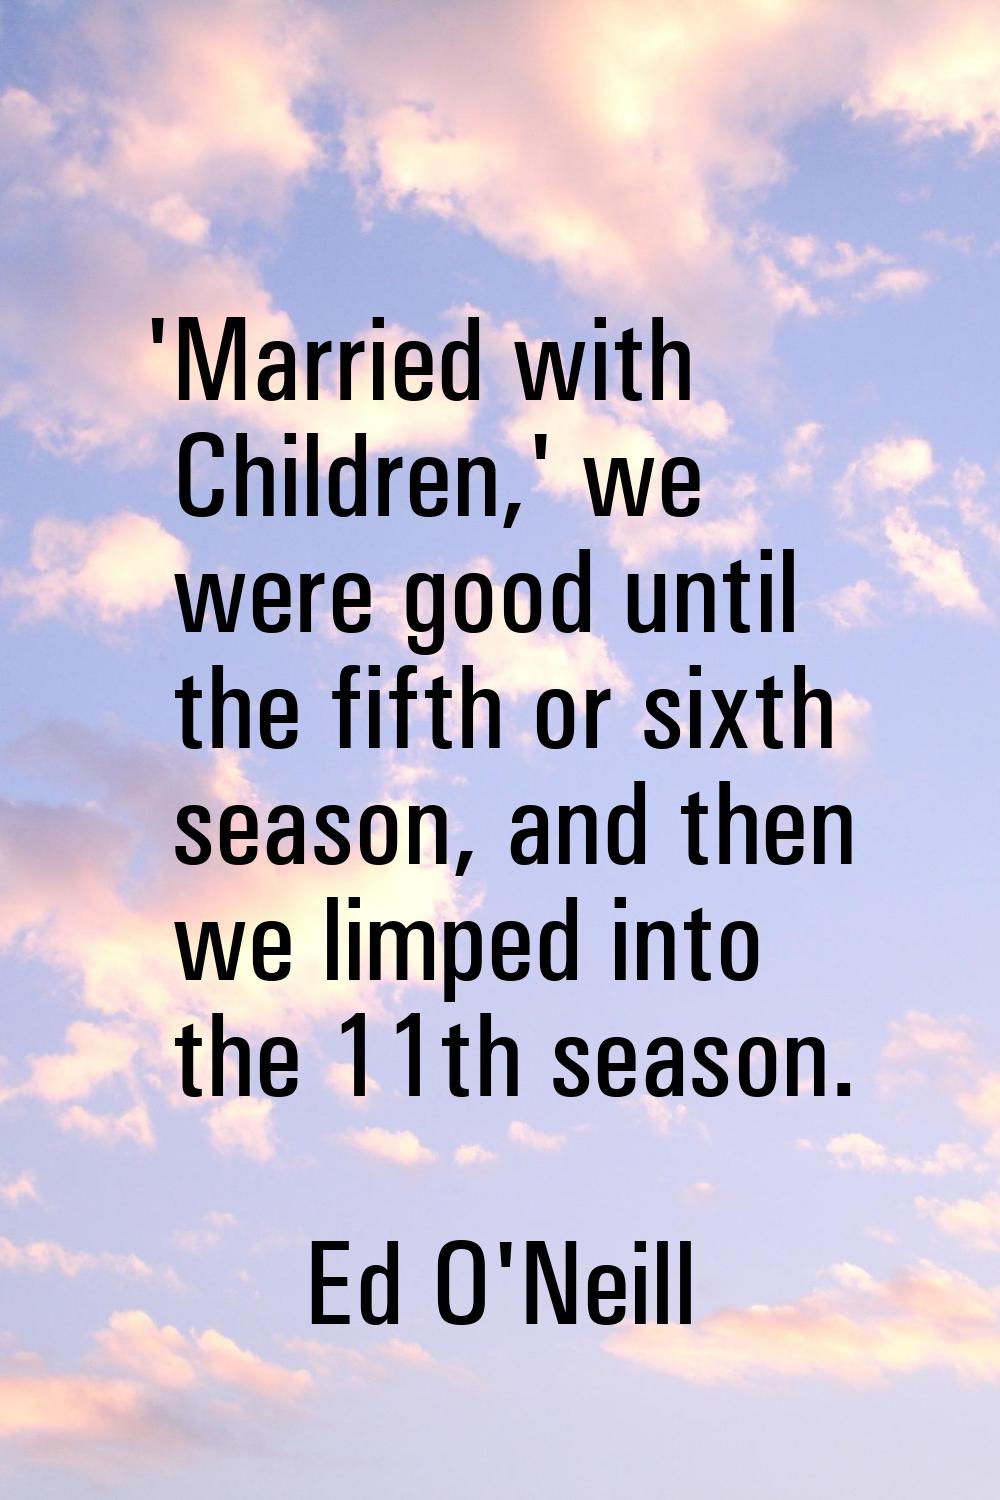 'Married with Children,' we were good until the fifth or sixth season, and then we limped into the 